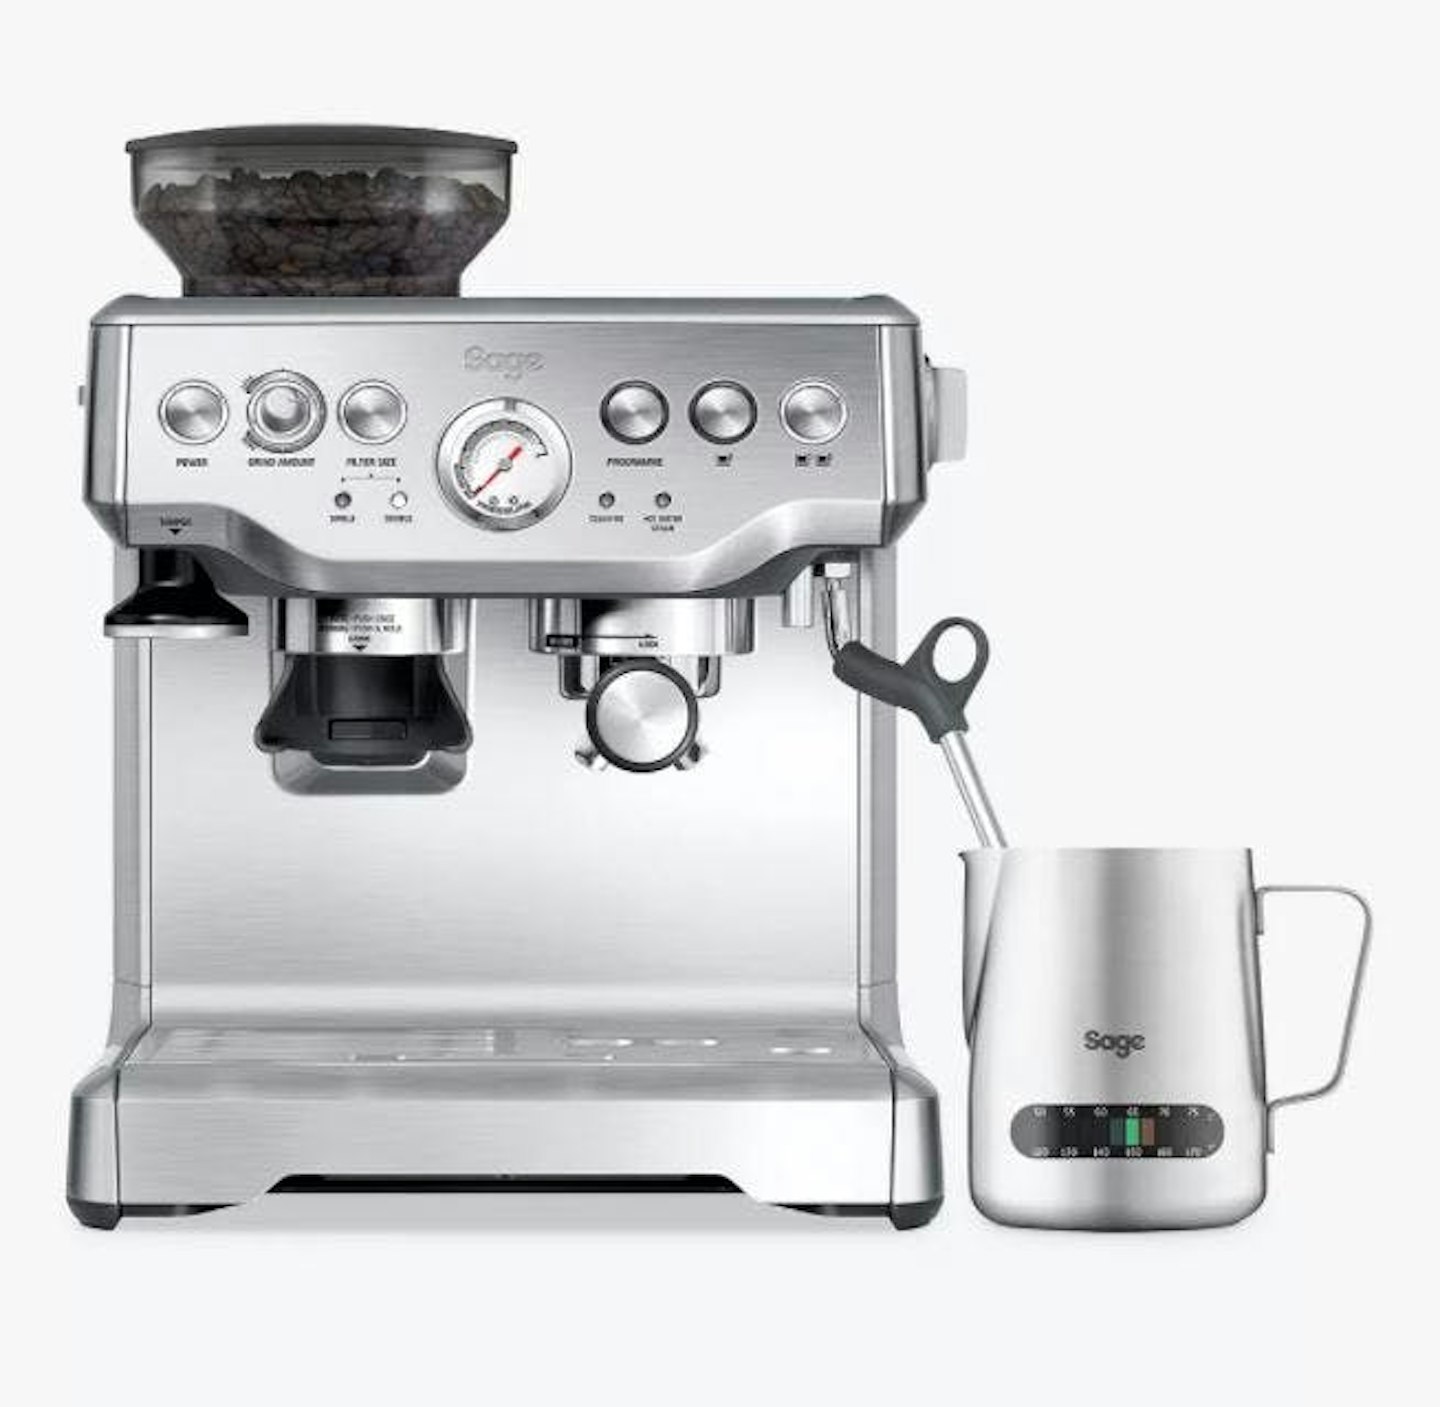 The best bean-to-cup coffee machines: Sage Barista Express Bean-to-Cup Coffee Machine